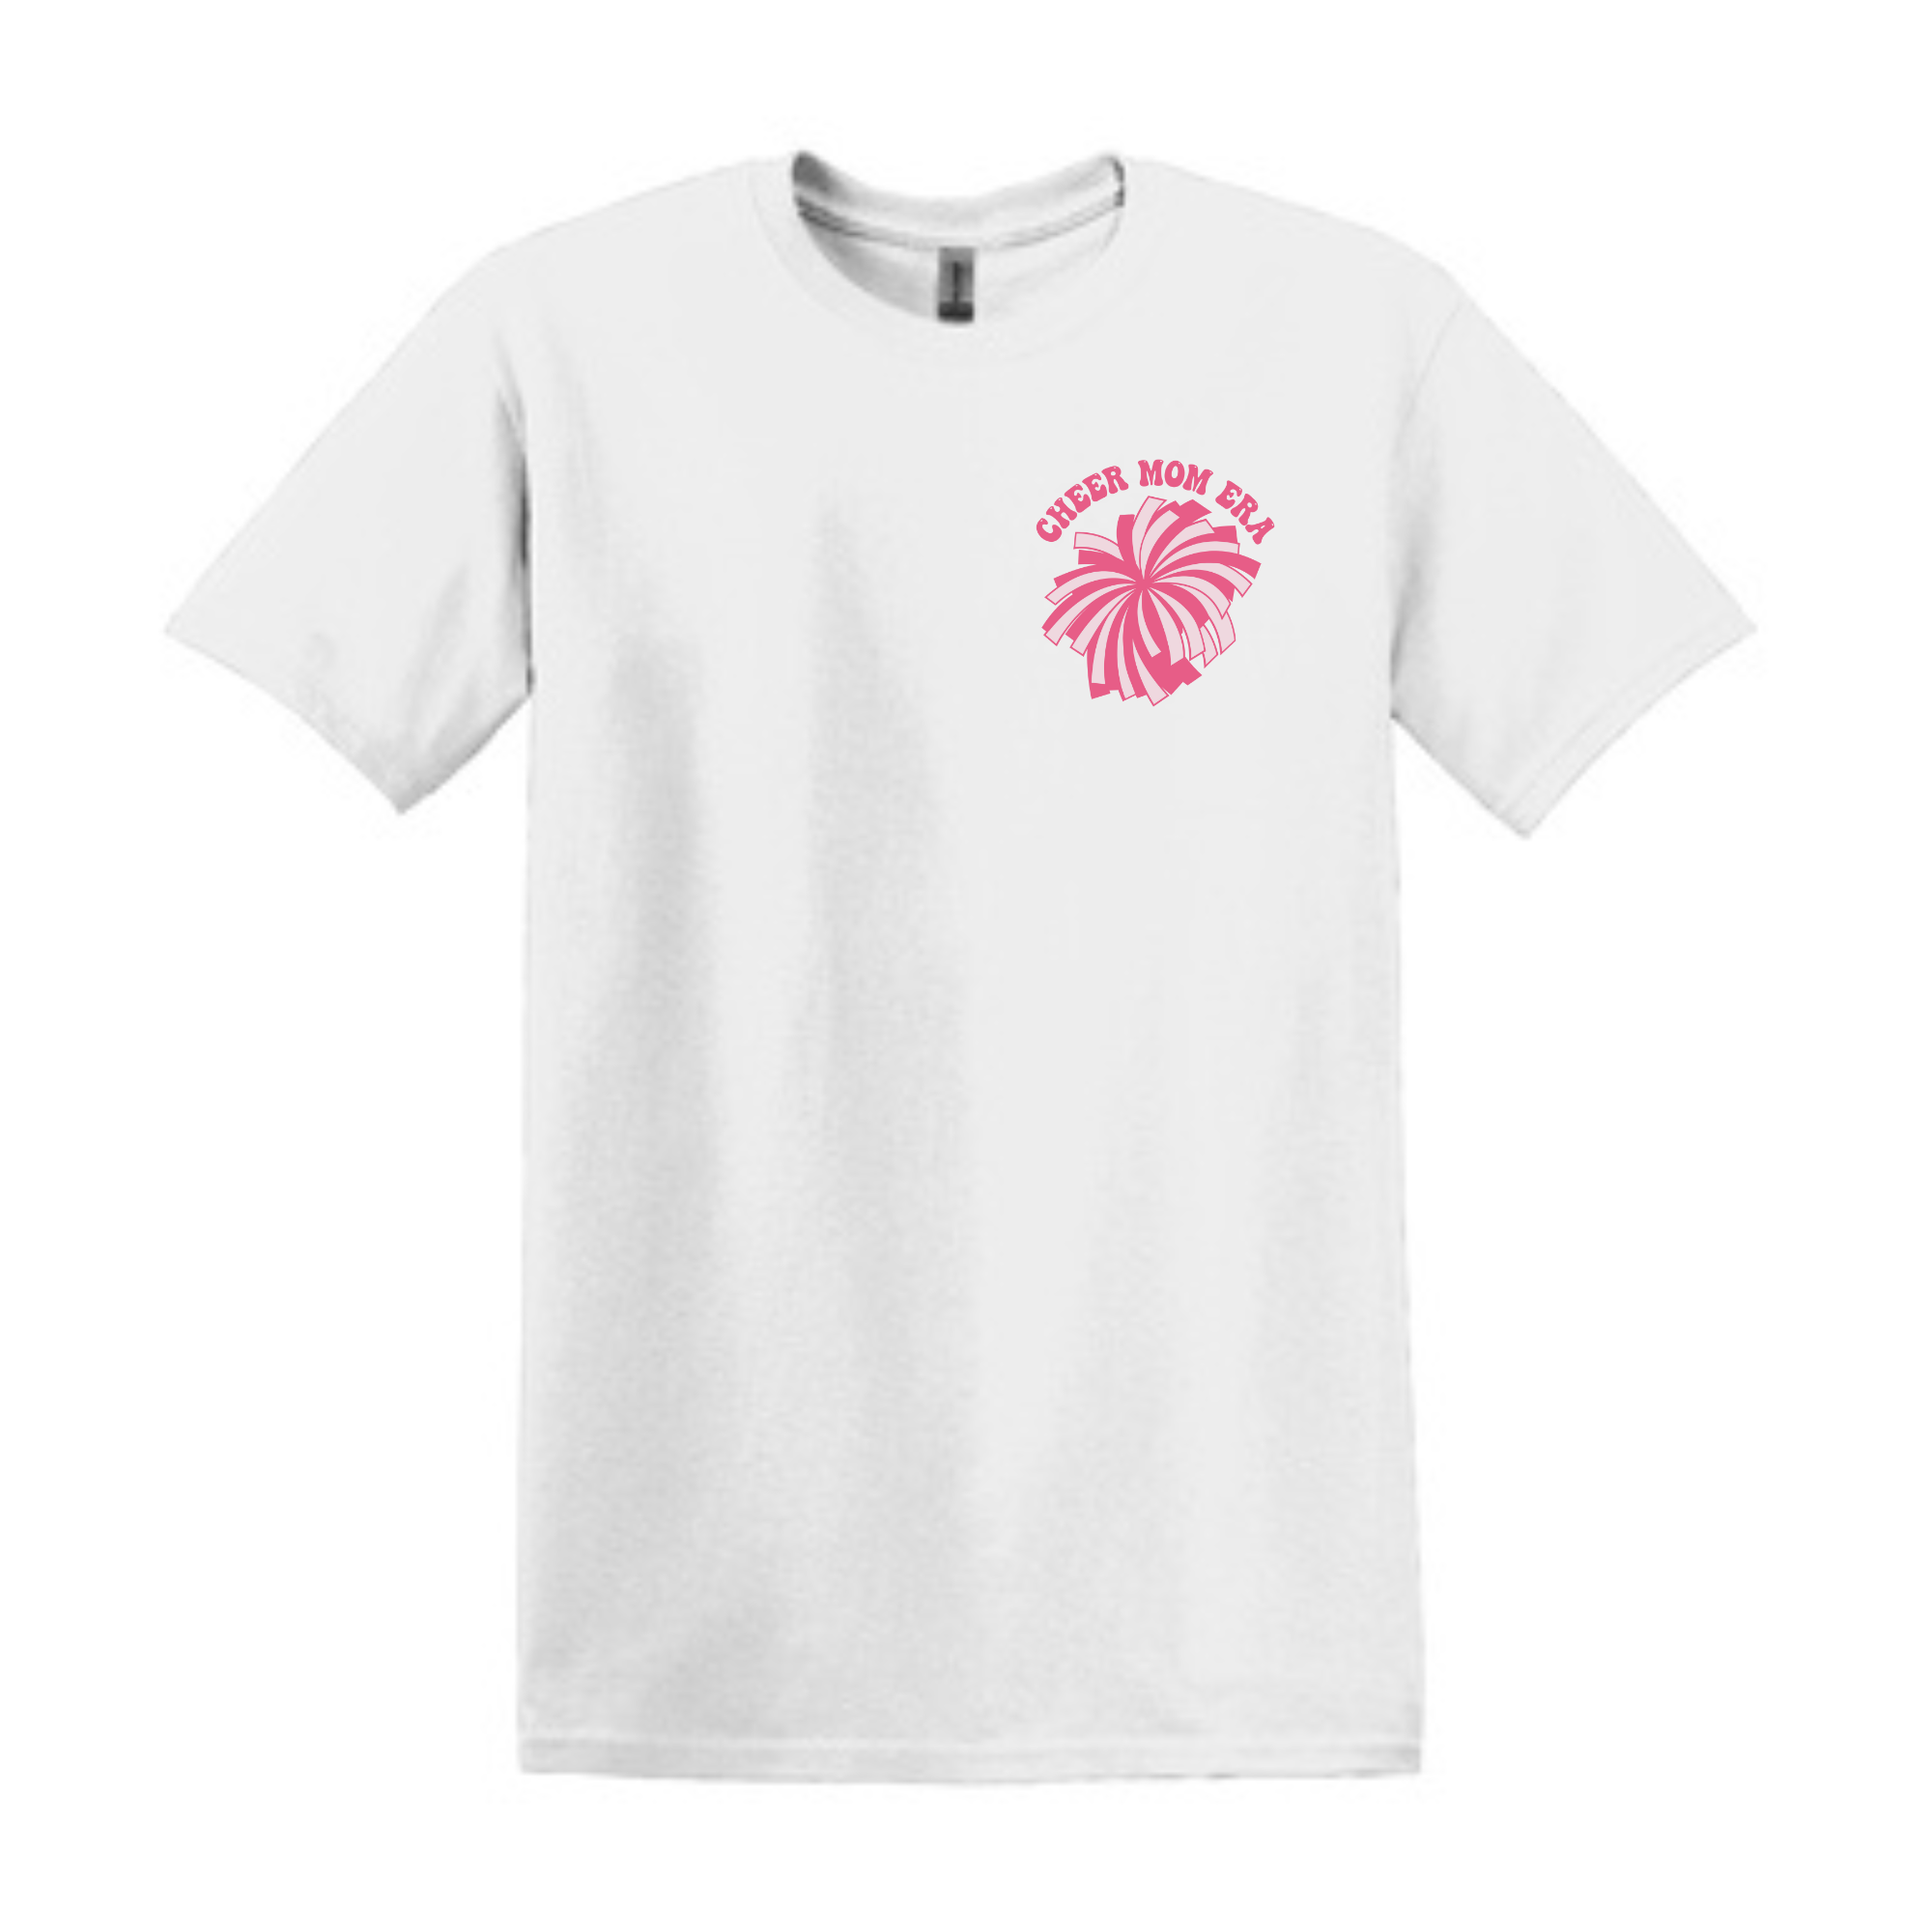 Central Pink In My Cheer Mom Era White T-Shirt- 64000